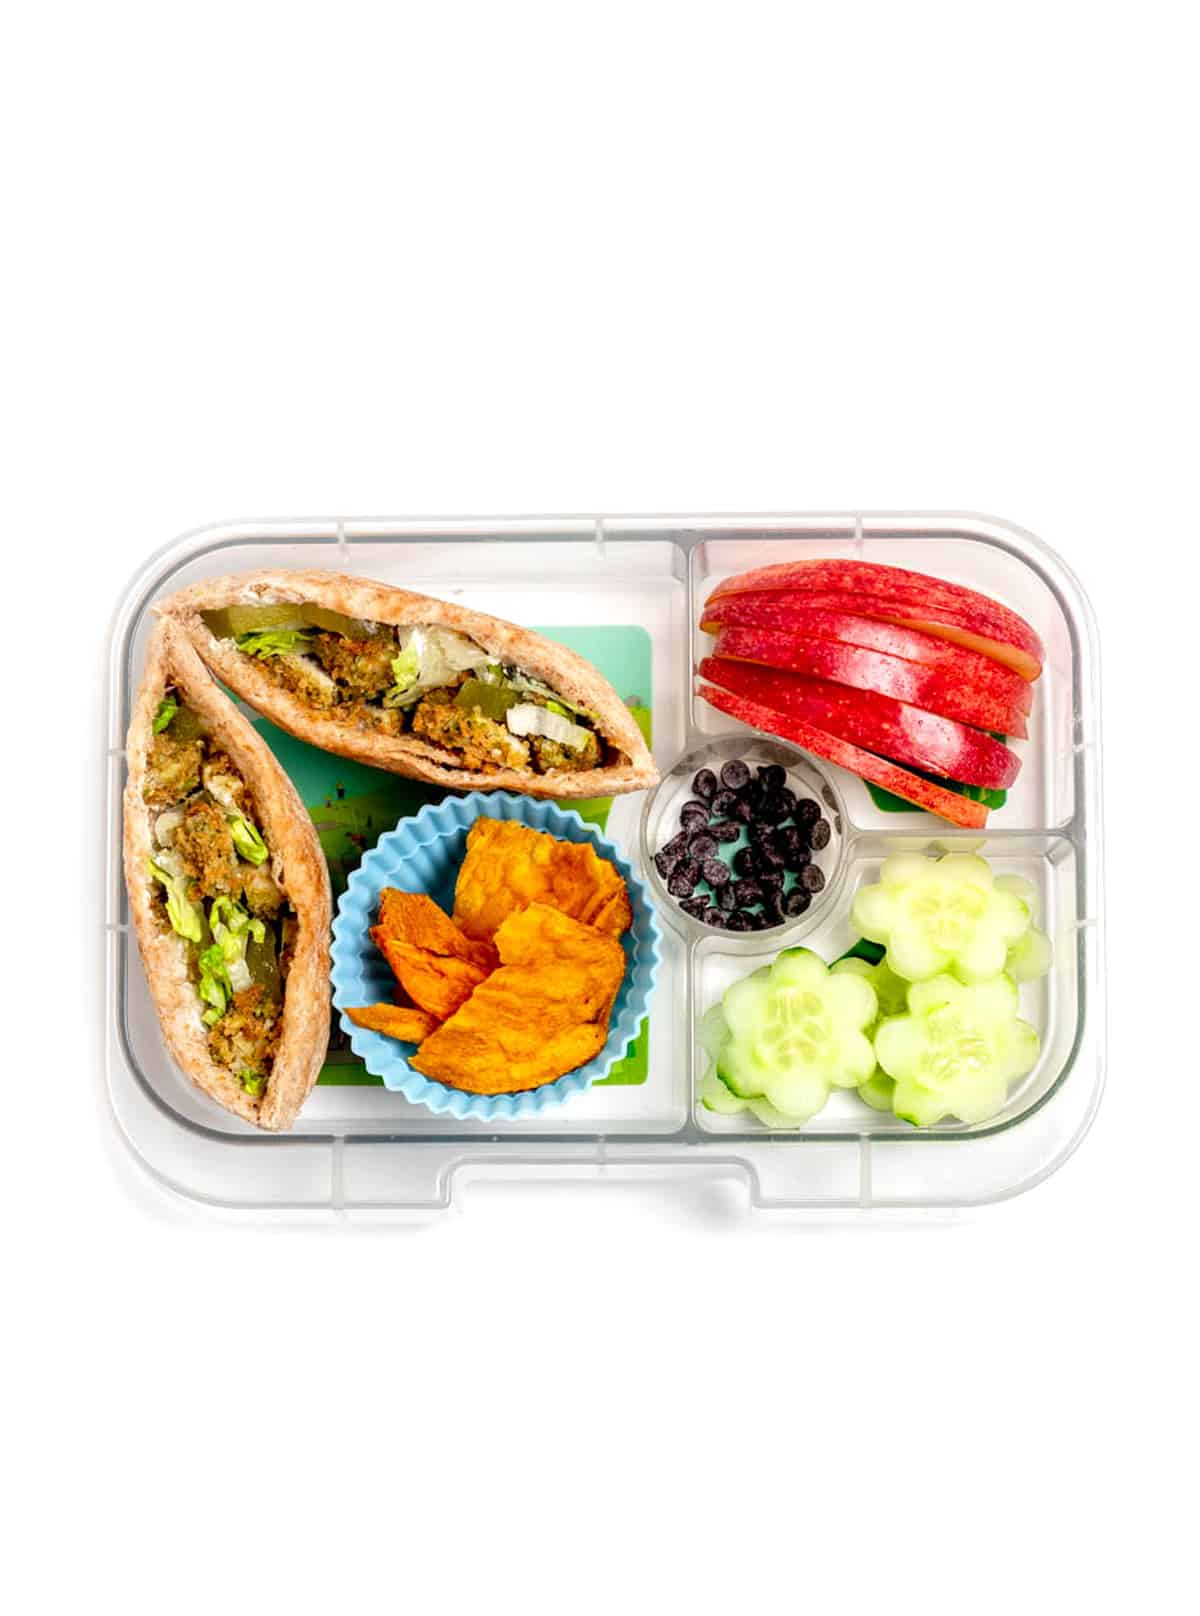 A lunch box with falafel pita with sweet potato chips, flower cucumbers, apple slices and mini chocolate chips.